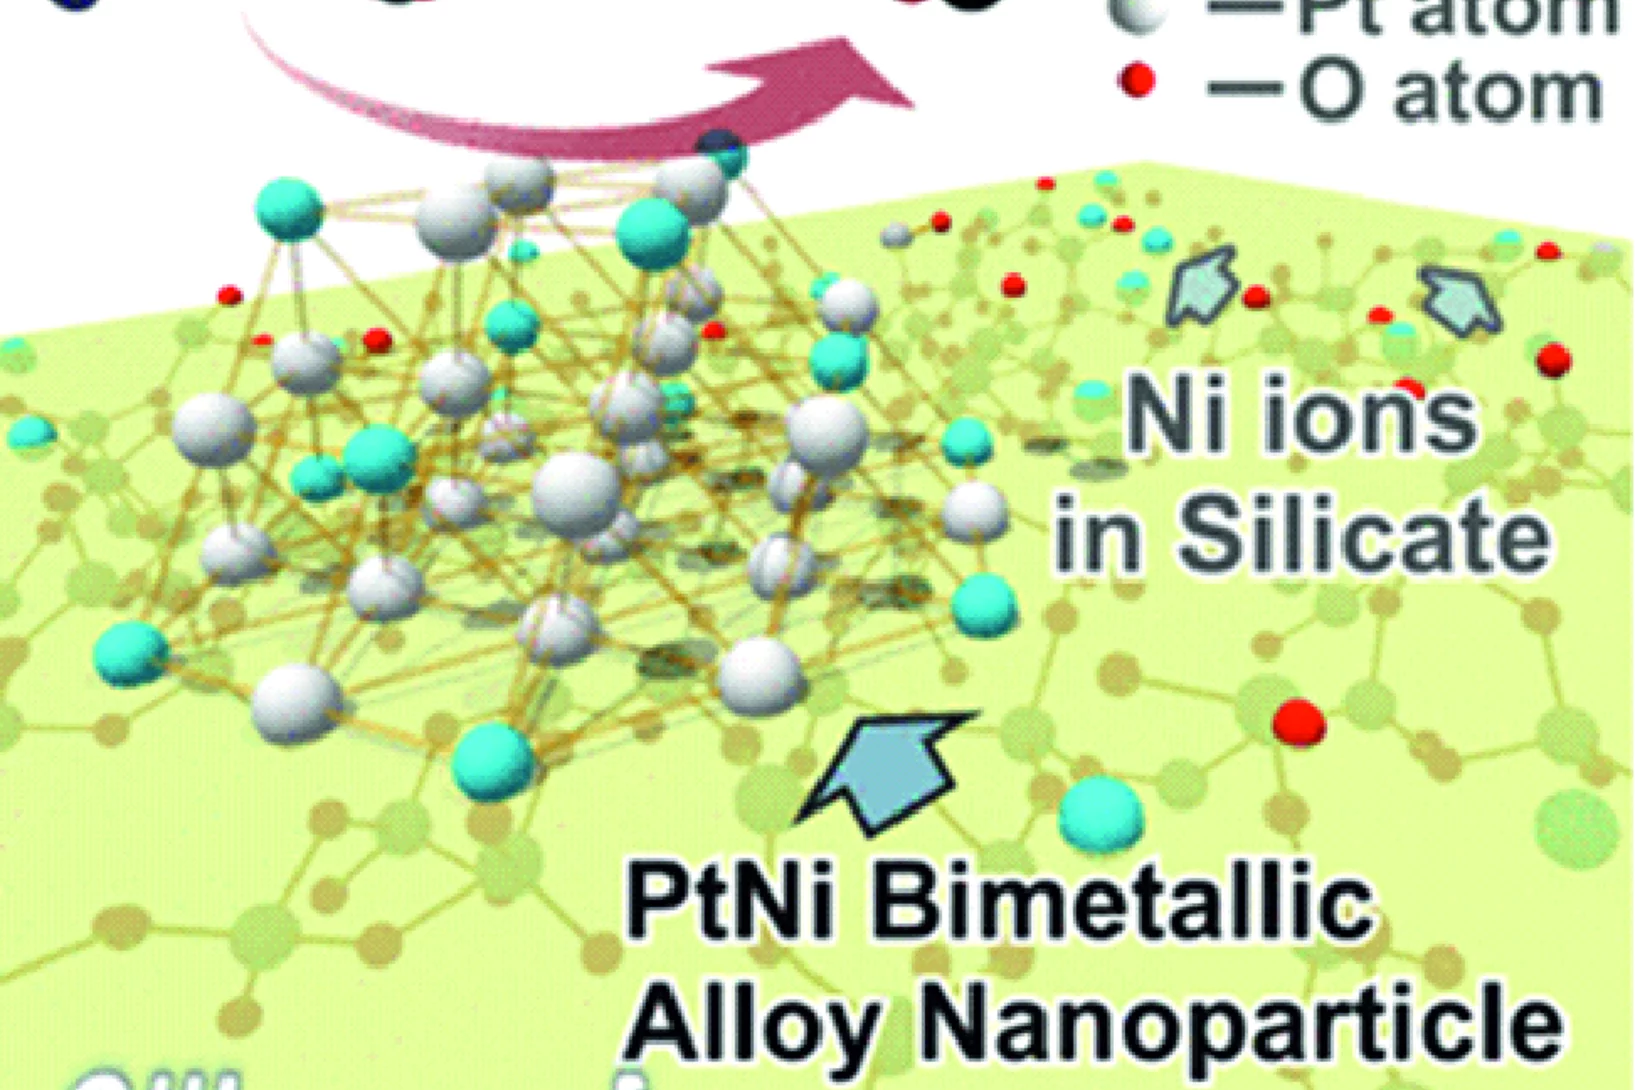 Schematic representation of the active state of a Pt-Ni bimetallic nano-particle on the silica surface with unreduced nickel ions in/on silicates of the support.